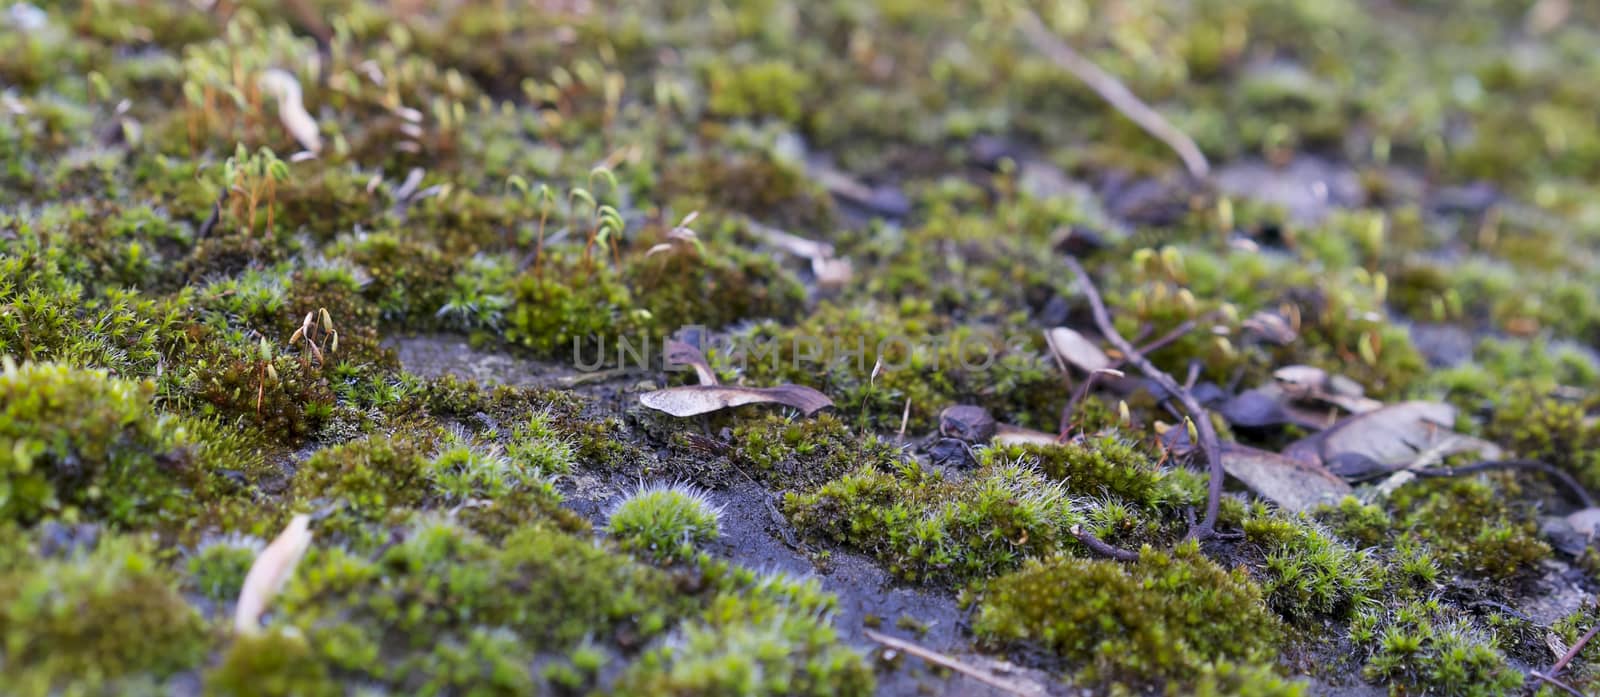 Green wet moss growing on stone mossy surface background image with blur bokeh